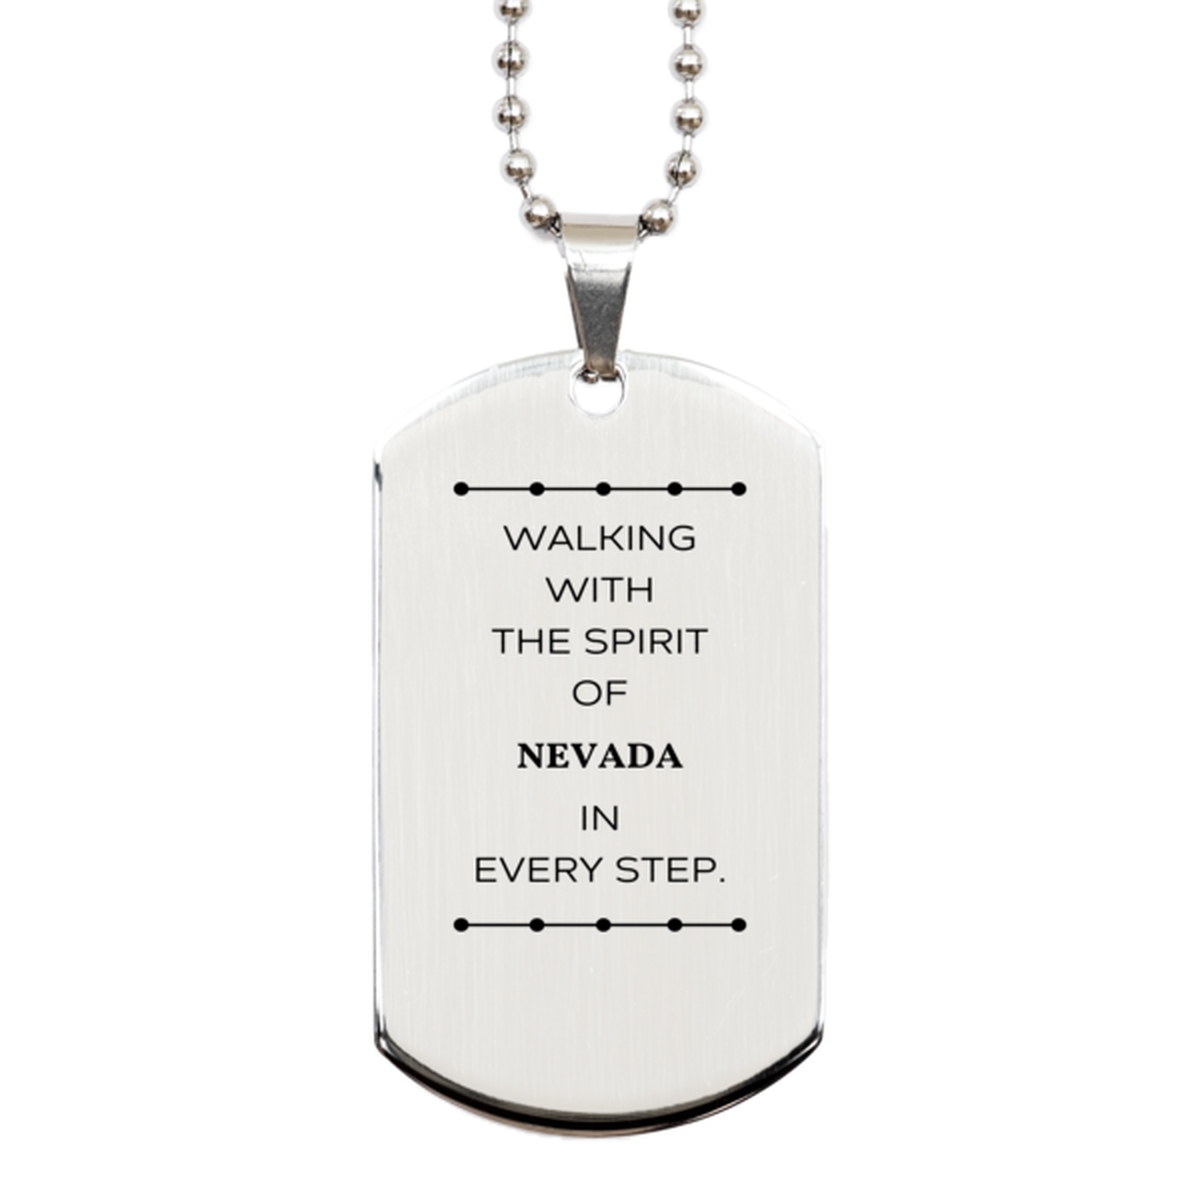 Nevada Gifts, Walking with the spirit, Love Nevada Birthday Christmas Silver Dog Tag For Nevada People, Men, Women, Friends